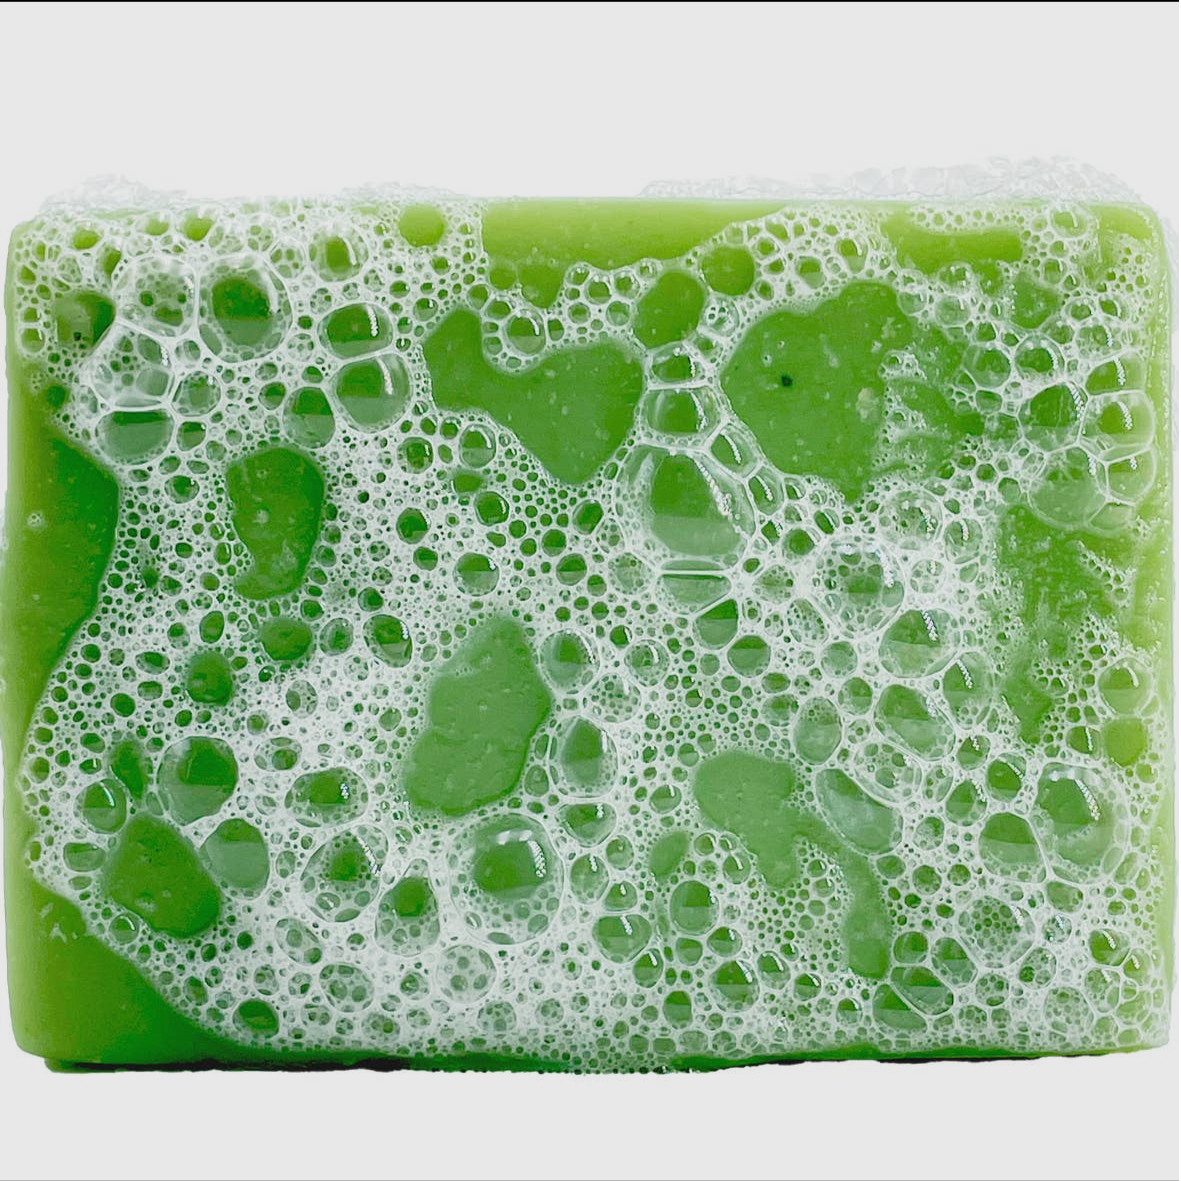 Sapiens Bar Soap Aloe Relax - Genuine Design luxury consignment Calgary, Alberta, Canada New & pre-owned clothing, shoes, accessories.